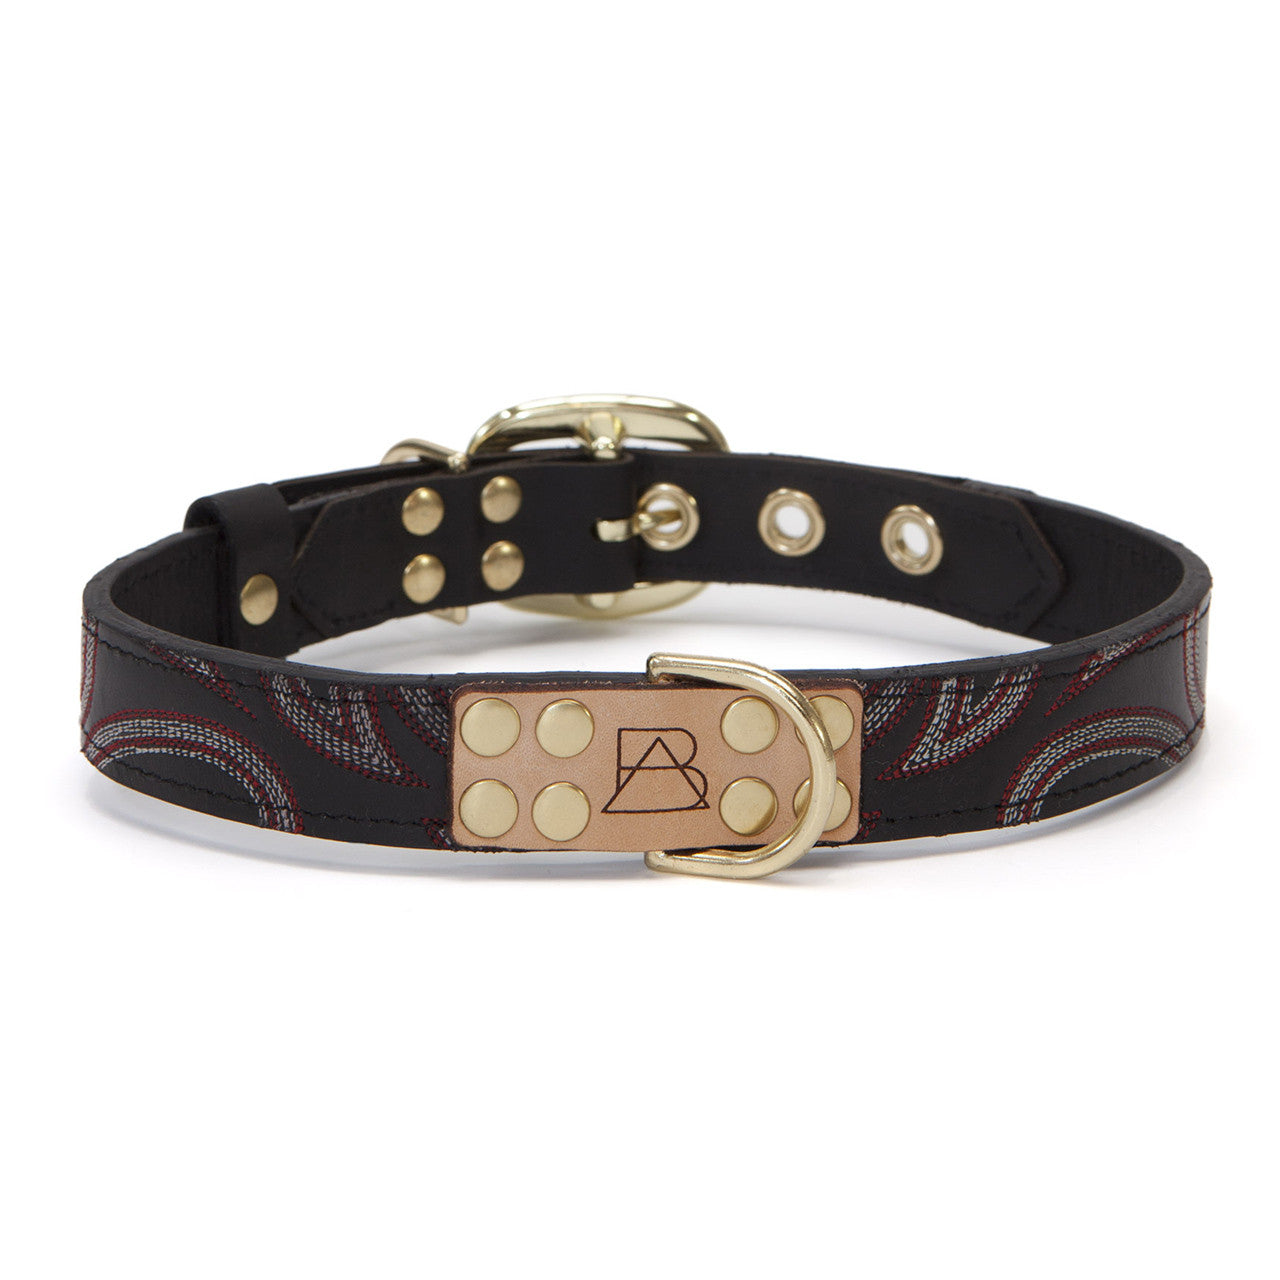 Black Dog Collar with Black Leather + Red/White Crest Stitching (front view)